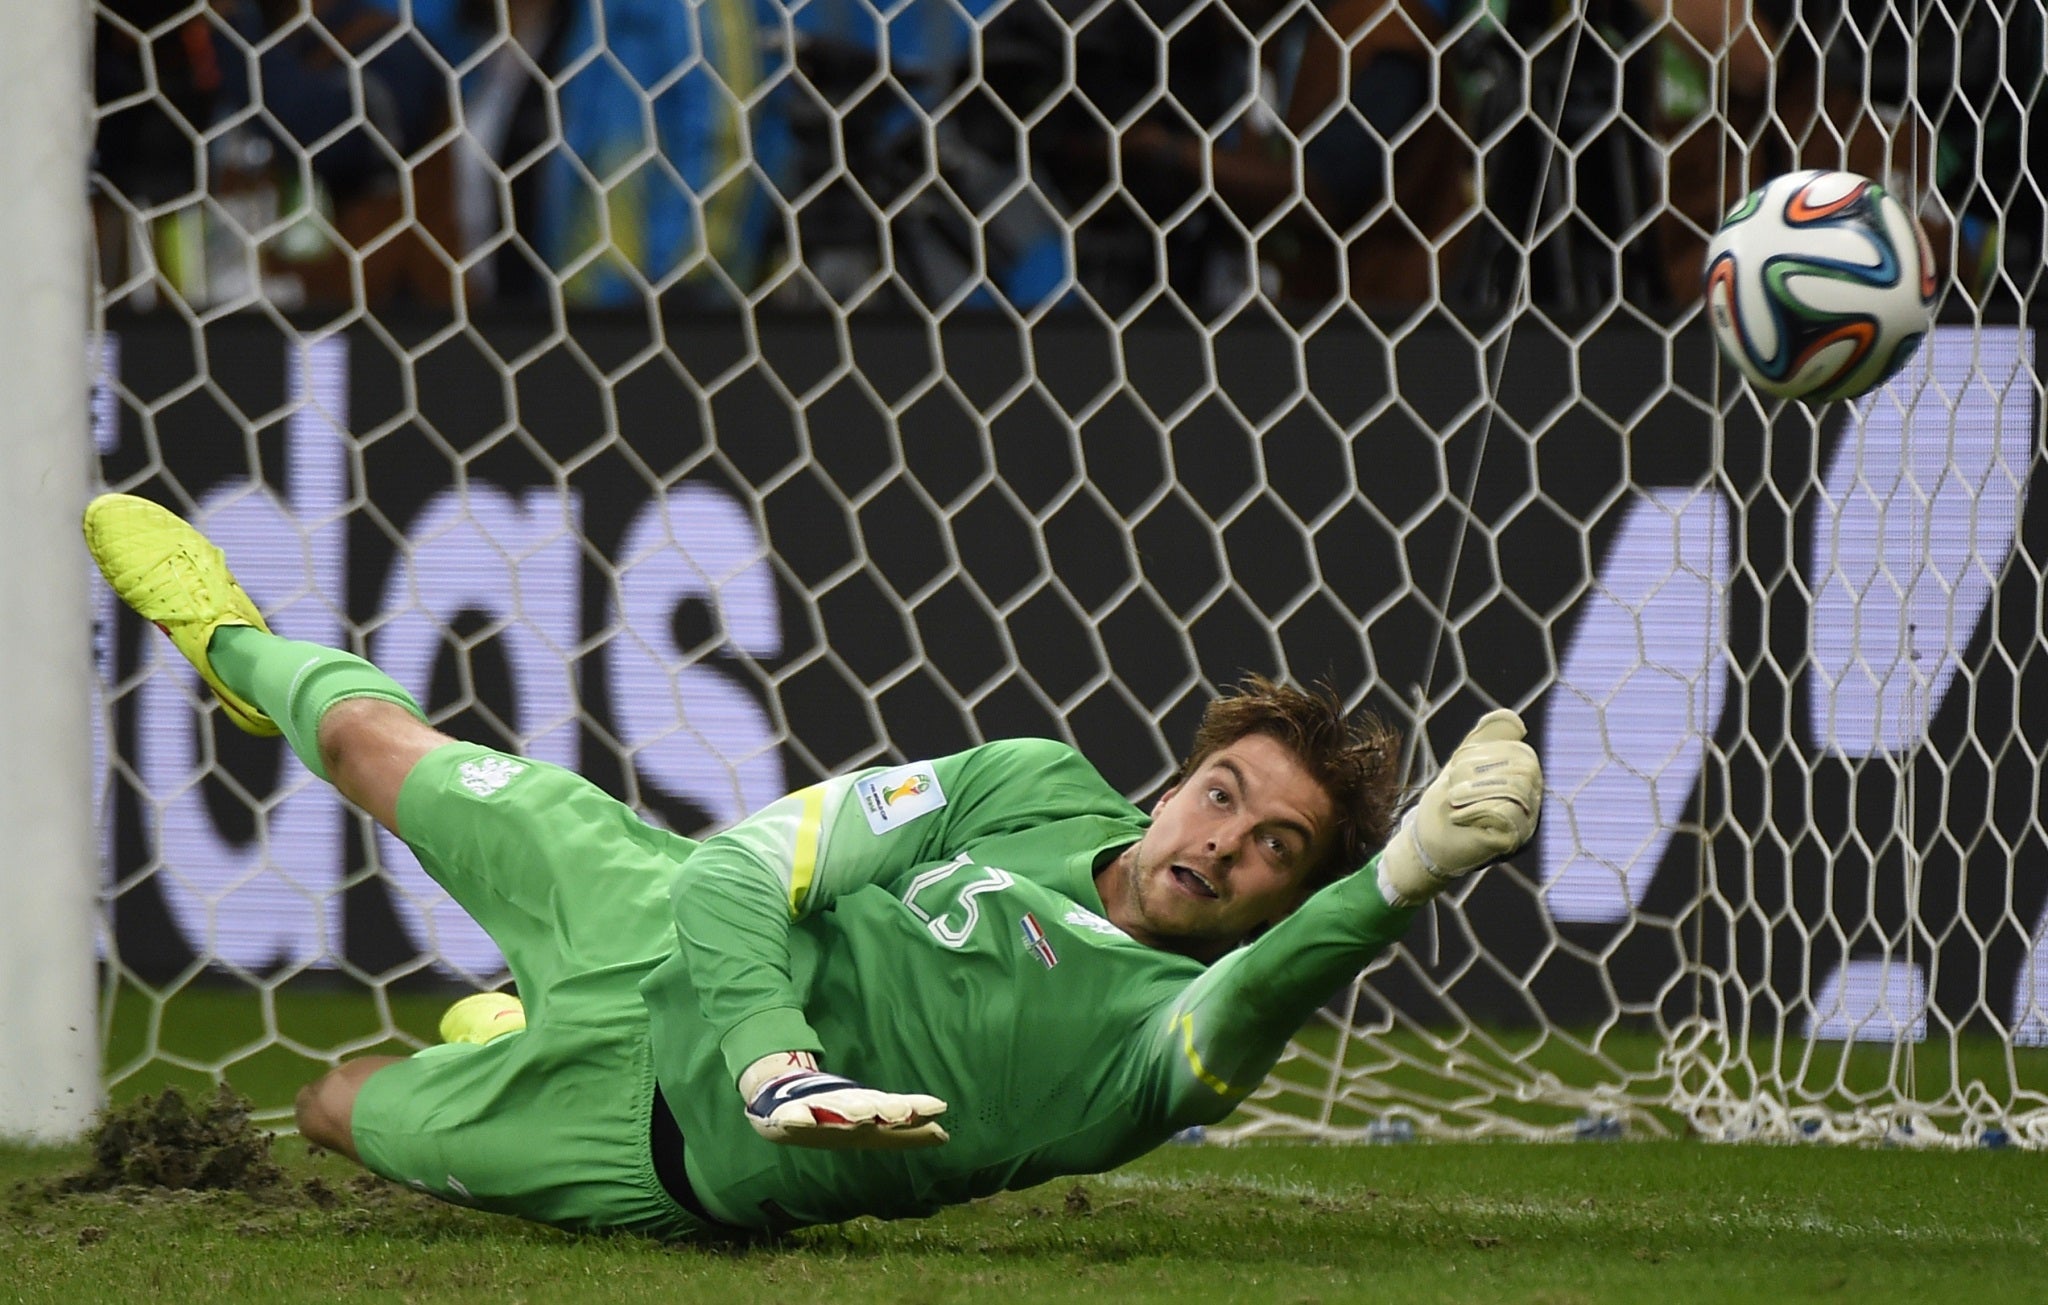 Substitute goalkeeper Tim Krul saves a penalty in the quarter-final shootout victory over Costa Rica